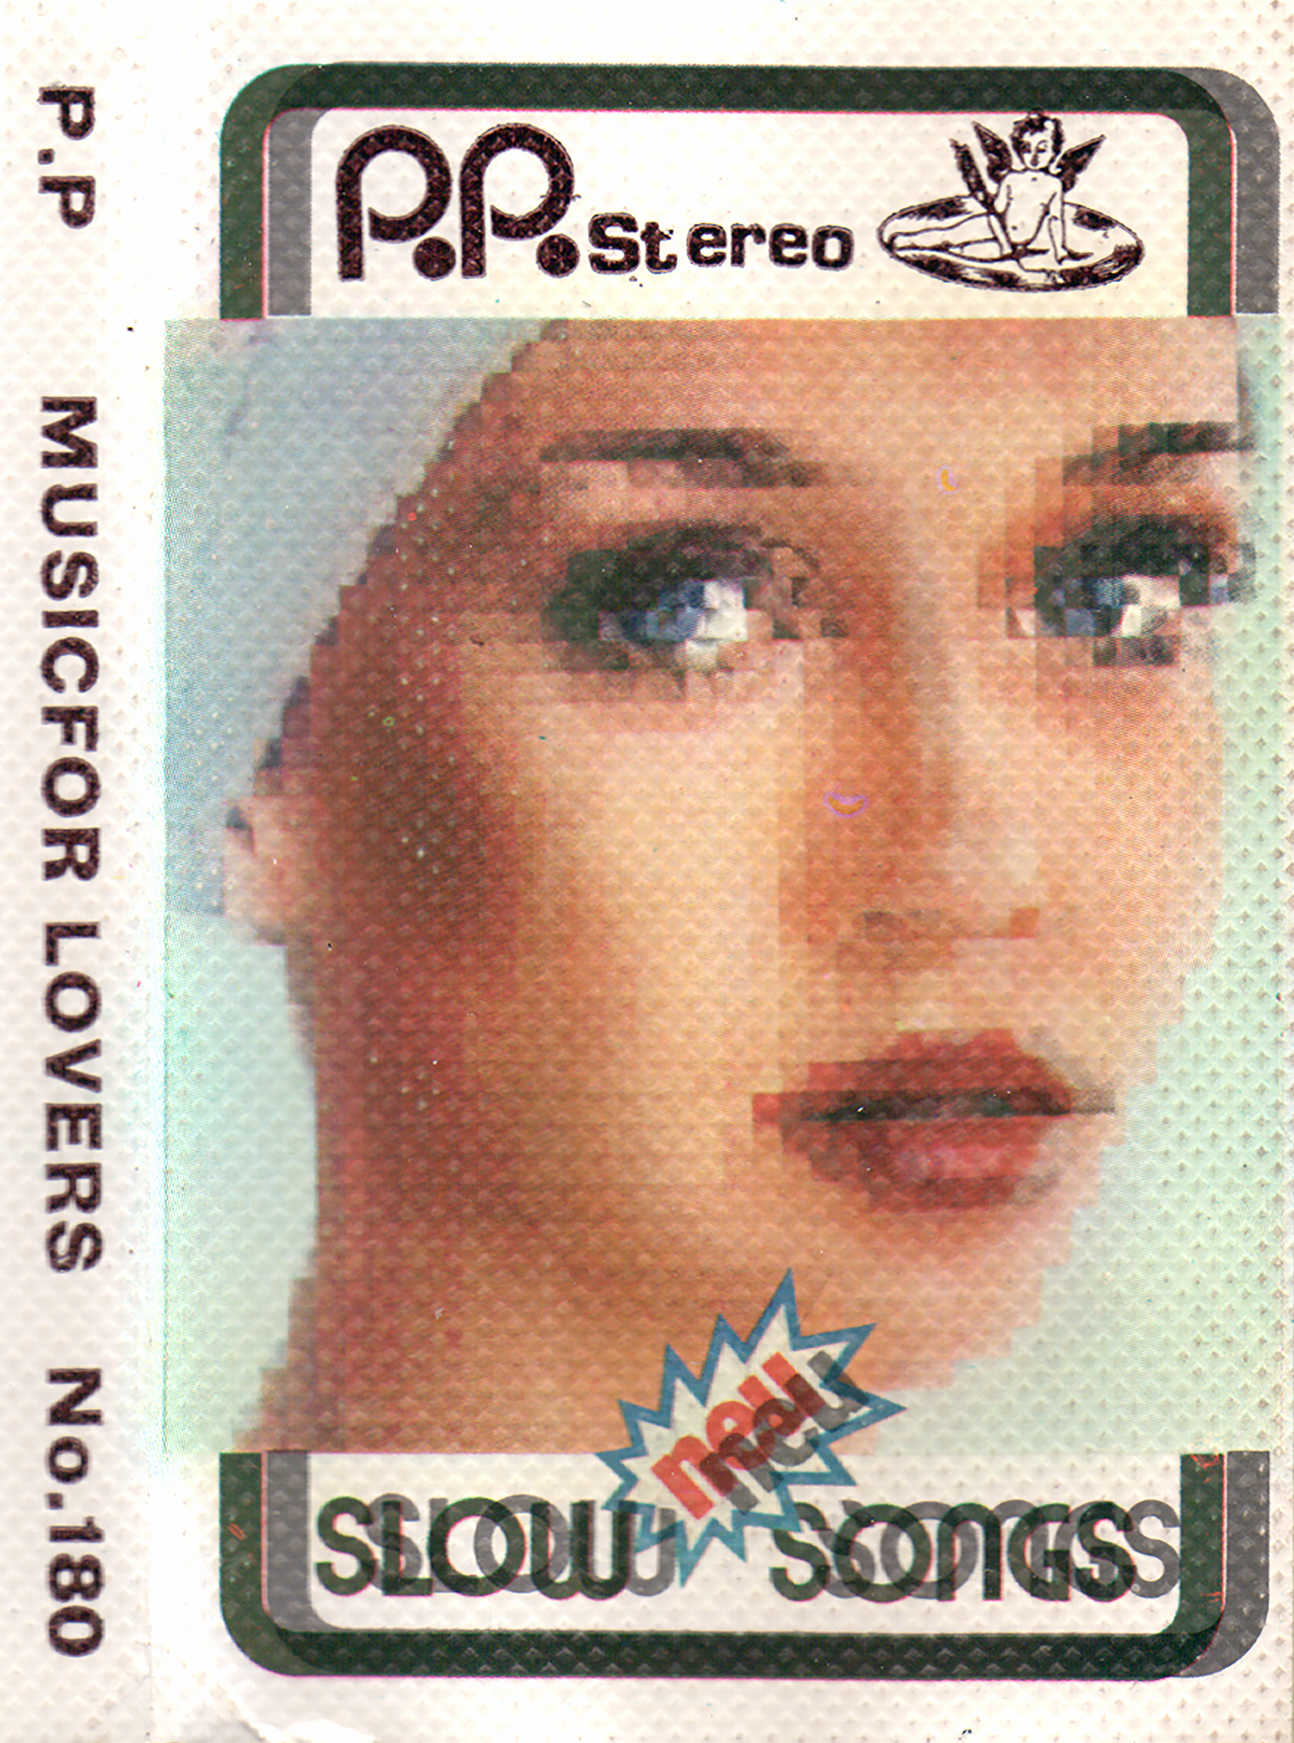 Multiple Artists. Music for Lover’s, No. 180. 1978. Designed by Afrassiabi. P.P. Stereo, Tehran, Iran. Cassette.